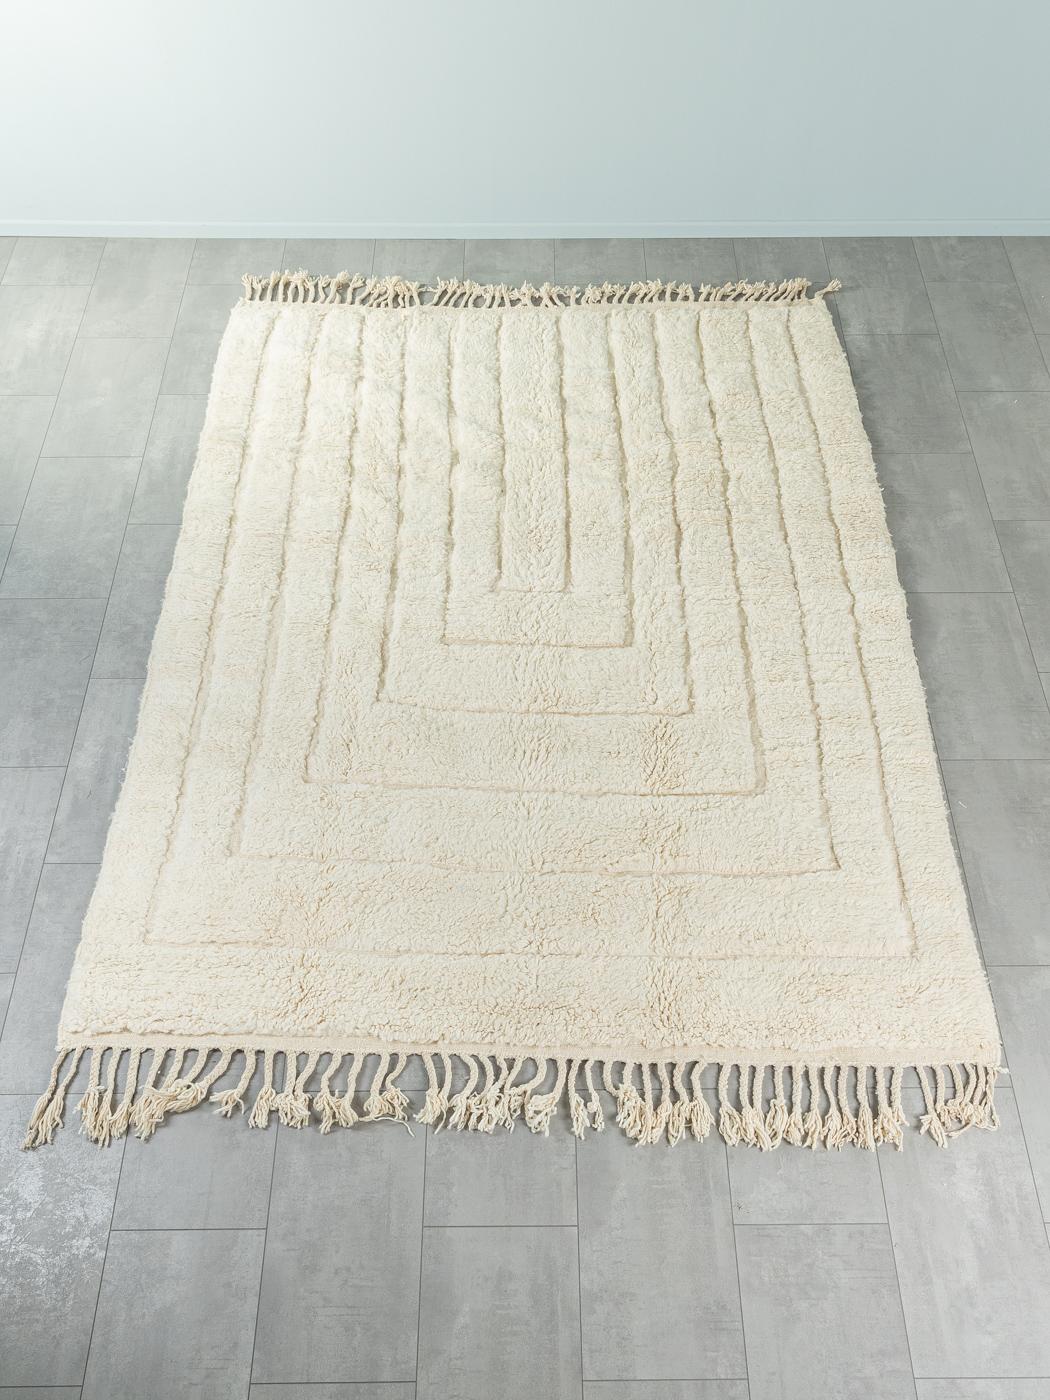 Mountains II is a contemporary 100% wool rug – thick and soft, comfortable underfoot. Our Berber rugs are handwoven and handknotted by Amazigh women in the Atlas Mountains. These communities have been crafting rugs for thousands of years. One knot